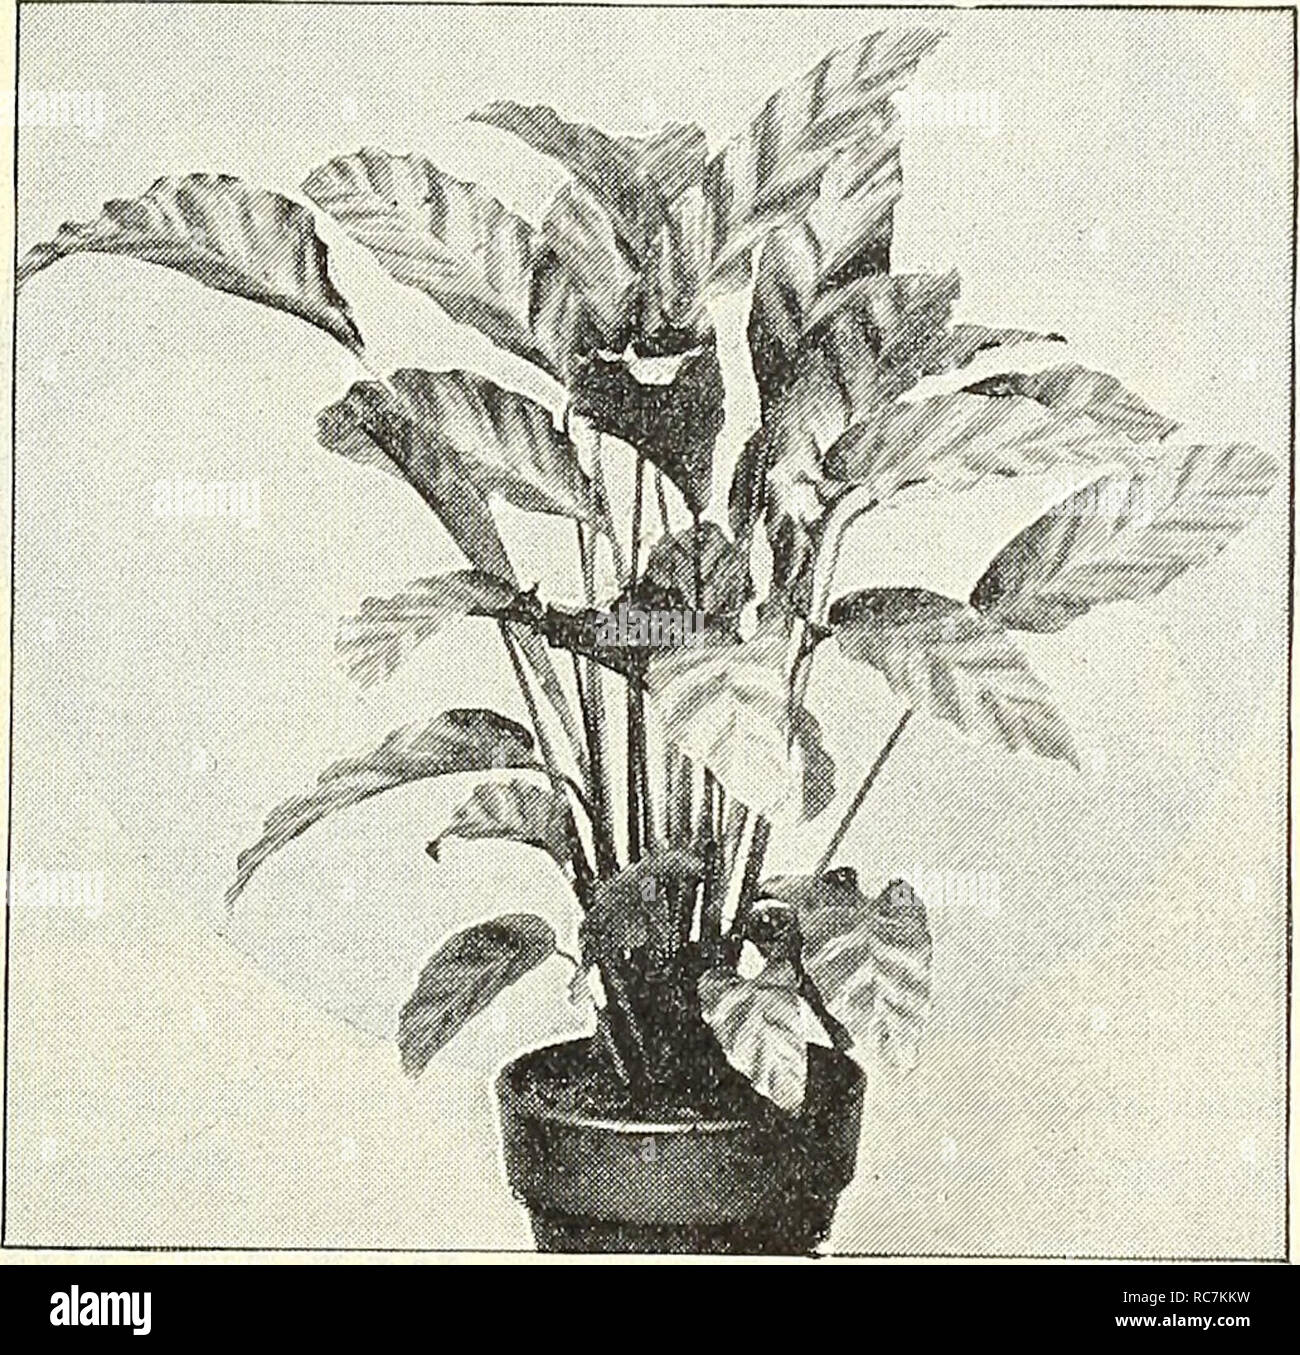 . Dreer's garden calendar : 1903. Seeds Catalogs; Nursery stock Catalogs; Gardening Equipment and supplies Catalogs; Flowers Seeds Catalogs; Vegetables Seeds Catalogs; Fruit Seeds Catalogs. Musa Ensetb. Lantana Craigi. Lotus Peliorhynchus. (Coral Gem.) A most charming trailing plant, especially suited for basket culture, with small, slender silvery-green foliage and bright coral-red flowers. 15 cts. each ; 4 for 50 cts. MARANTA. Valuable decorative stove plants, remarkable for the rich- ness and beauty of their varied foliage. each. Aurea Striata $0 50 Bella t 25 Goveiana 25 Kerchoviana. Usual Stock Photo